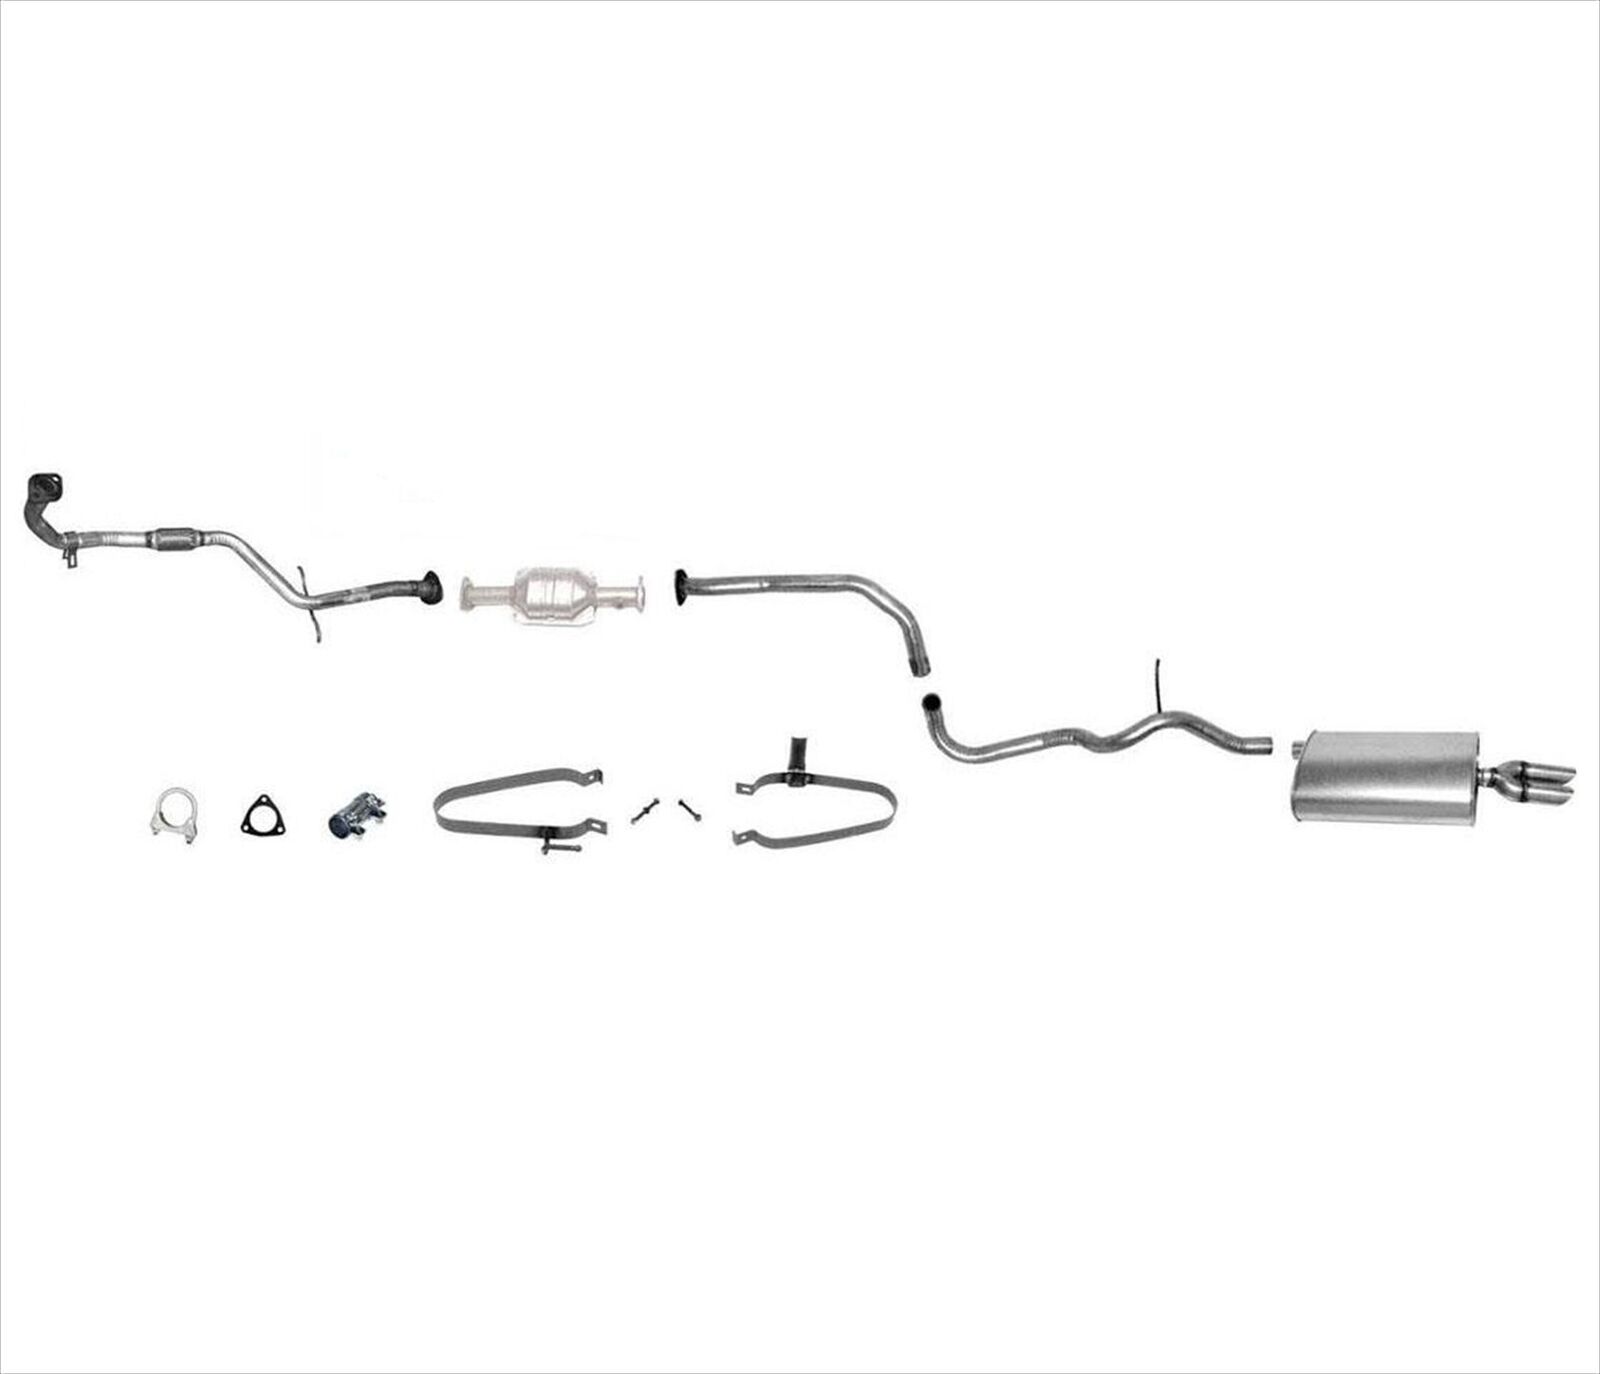 Fits 97-98 GMC Cavalier 2.2L Engine Only Converter Muffler Exhaust Pipe System